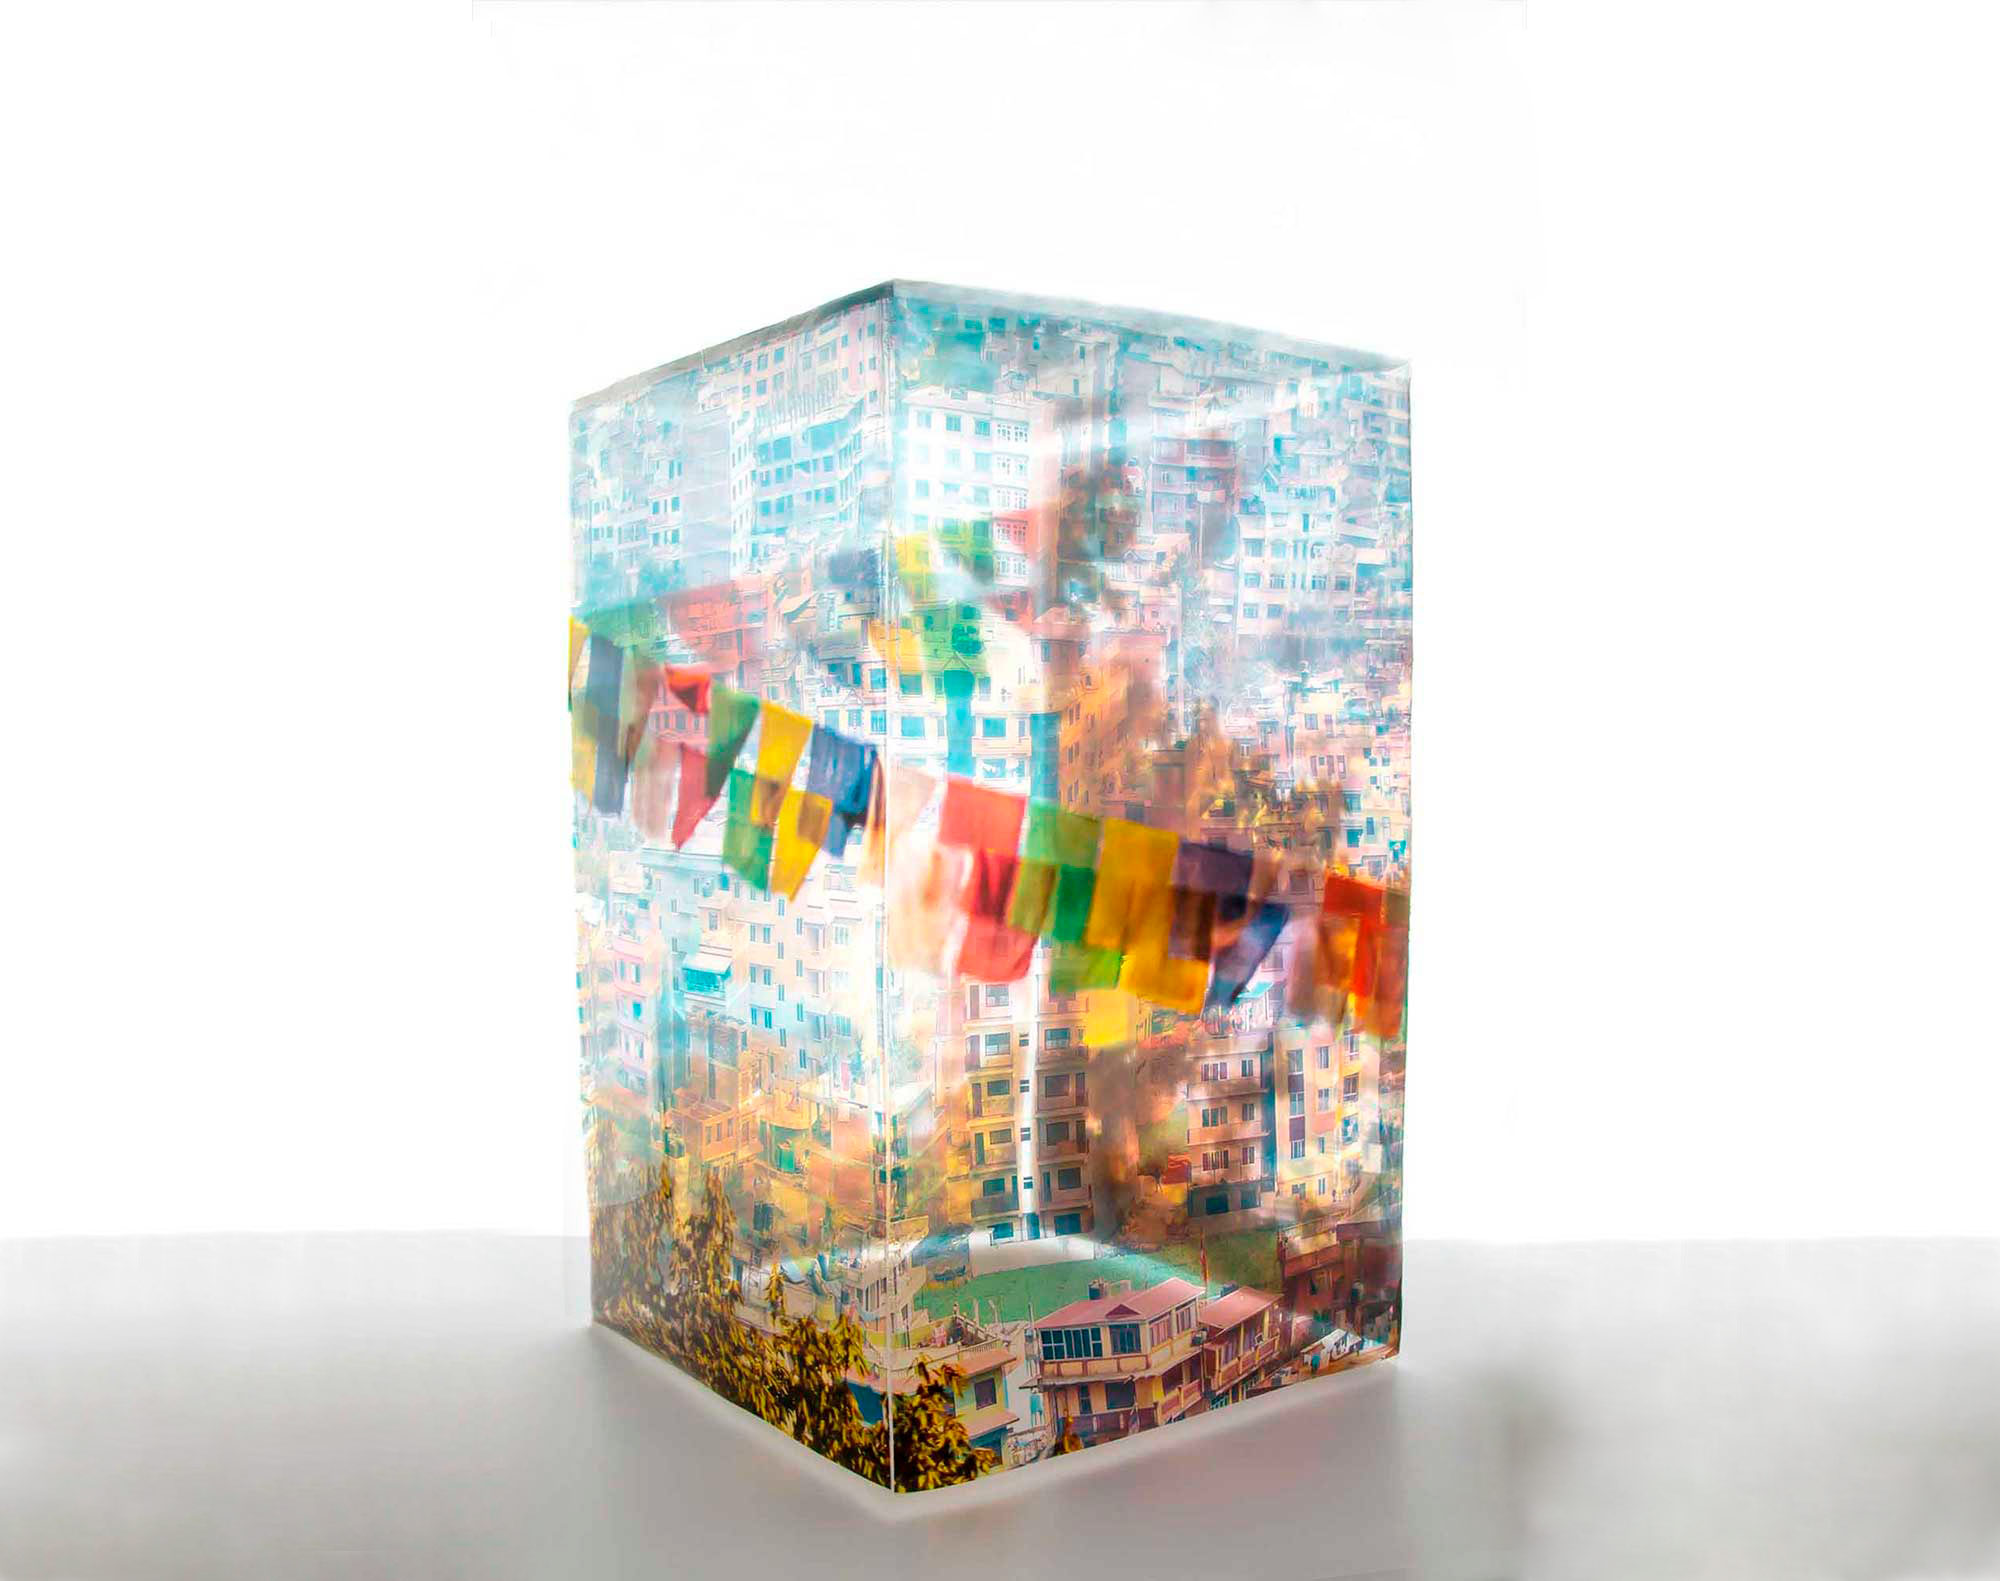 Photographic transparent sheet of Monkey Temple, Nepal, fused together to create a three-dimensional box.